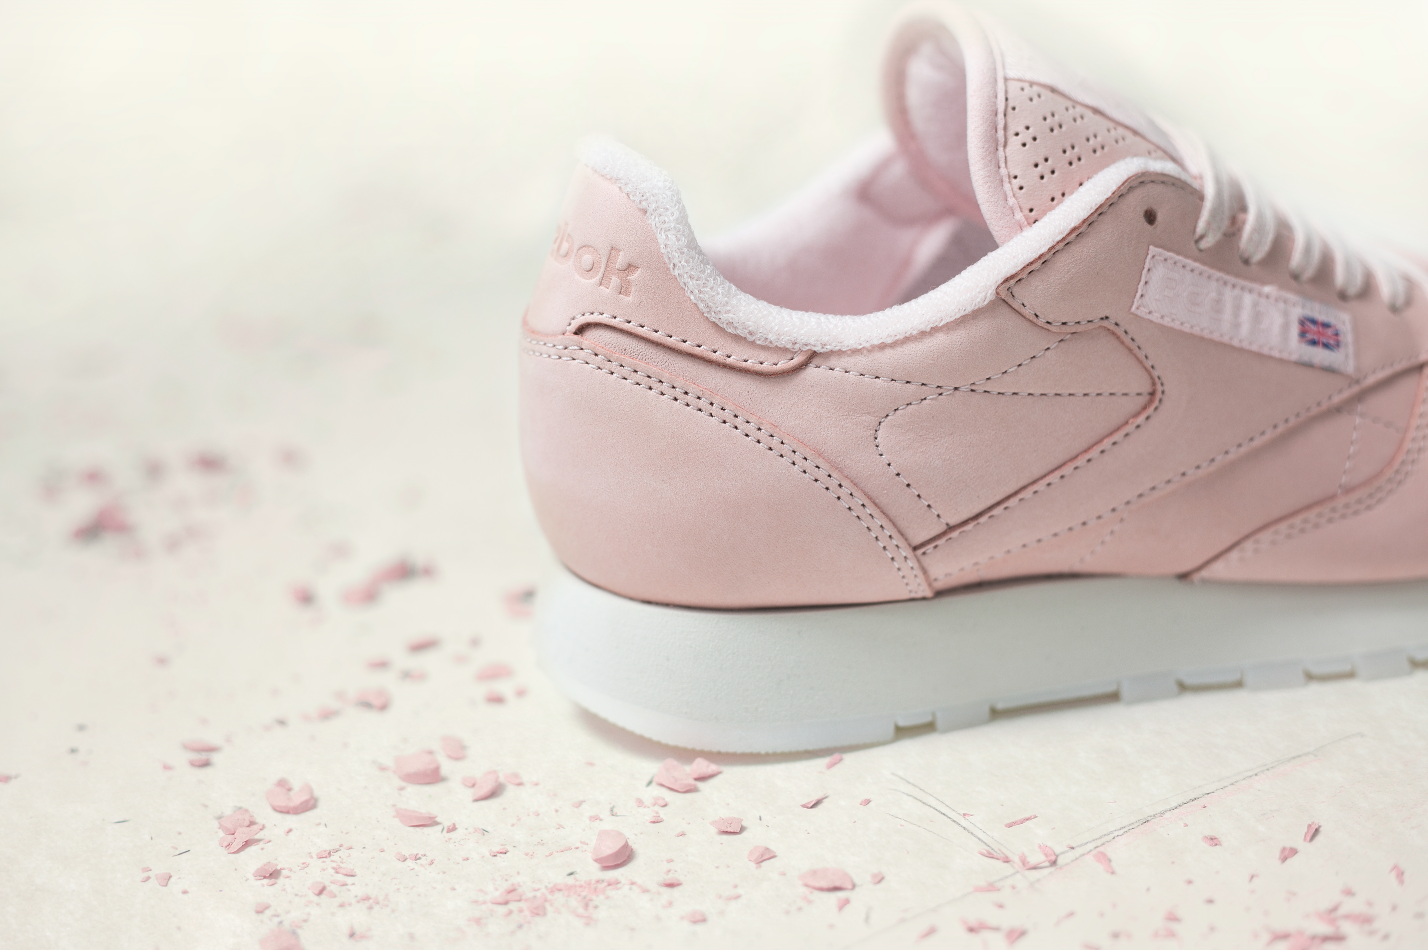 baby pink reebok trainers